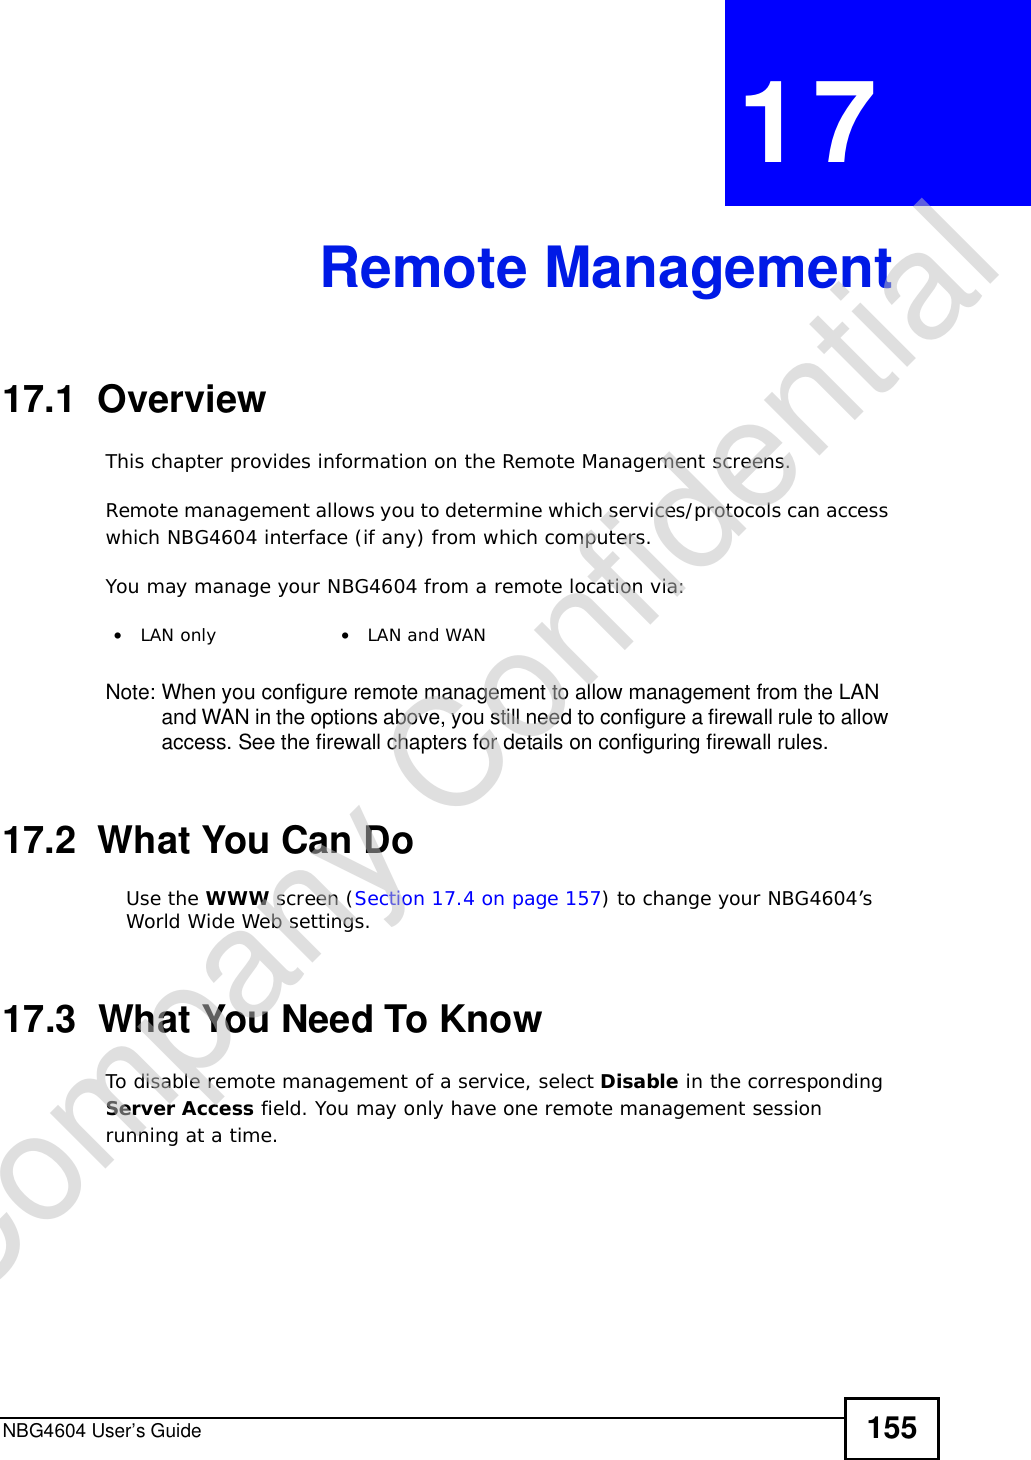 NBG4604 User’s Guide 155CHAPTER 17Remote Management17.1  OverviewThis chapter provides information on the Remote Management screens. Remote management allows you to determine which services/protocols can access which NBG4604 interface (if any) from which computers.You may manage your NBG4604 from a remote location via:Note: When you configure remote management to allow management from the LAN and WAN in the options above, you still need to configure a firewall rule to allow access. See the firewall chapters for details on configuring firewall rules.17.2  What You Can DoUse the WWW screen (Section 17.4 on page 157) to change your NBG4604’s World Wide Web settings.17.3  What You Need To KnowTo disable remote management of a service, select Disable in the corresponding Server Access field. You may only have one remote management session running at a time. •LAN only •LAN and WANCompany Confidential